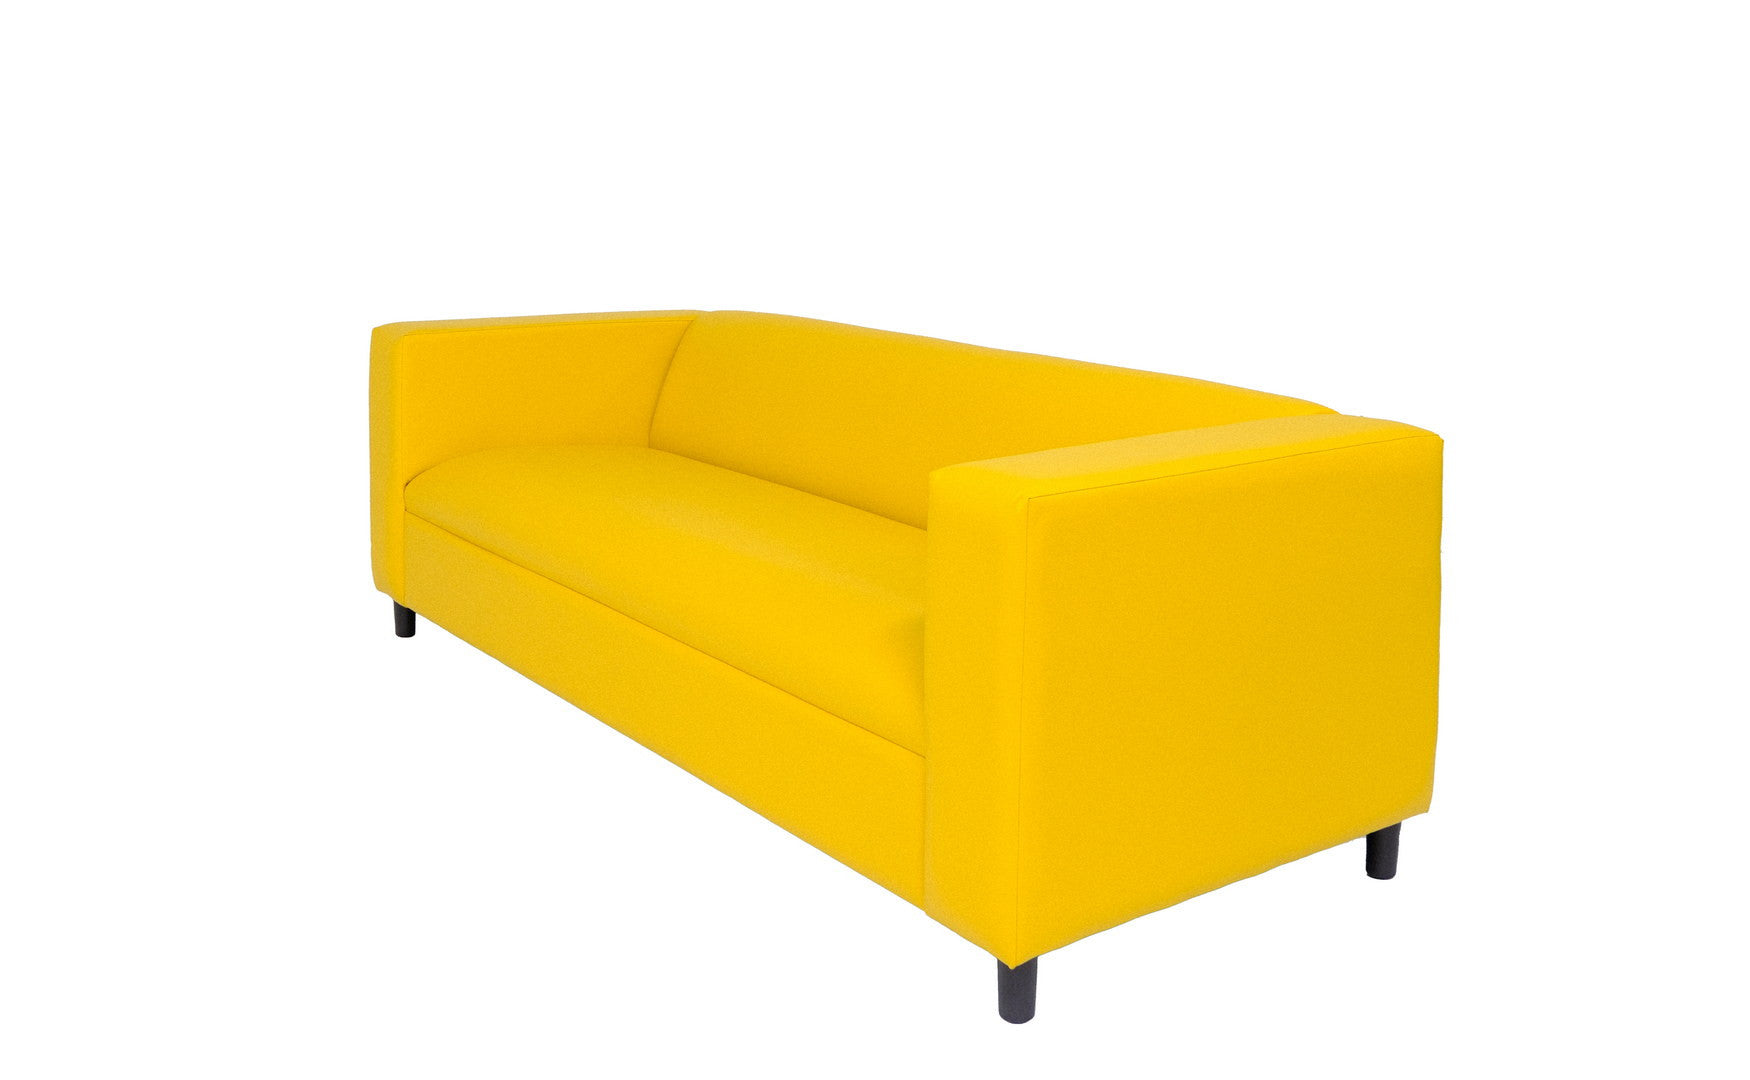 84" Yellow Faux Leather And Black Sofa